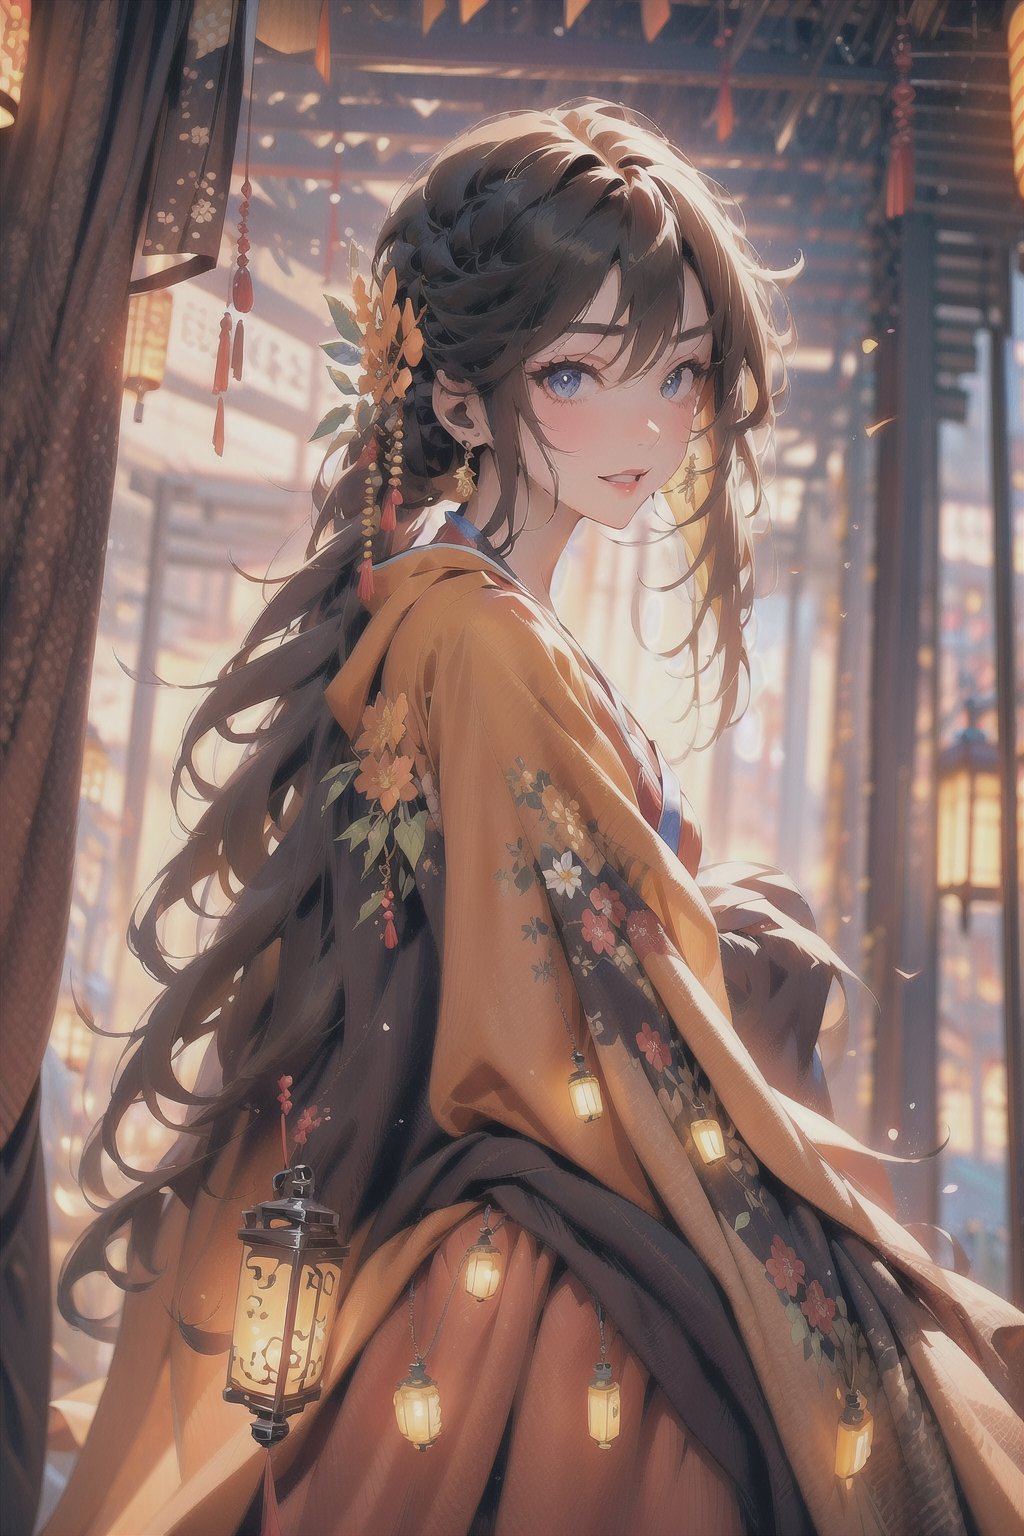 1 girl, colourful kimono, lantern pathway, torii, starry sky, from below, yellow obi, floral kimono, bright clothes, glowing lanterns, jewelery, modest cleavage, happy expression, brown hair, glowing flowers in hair